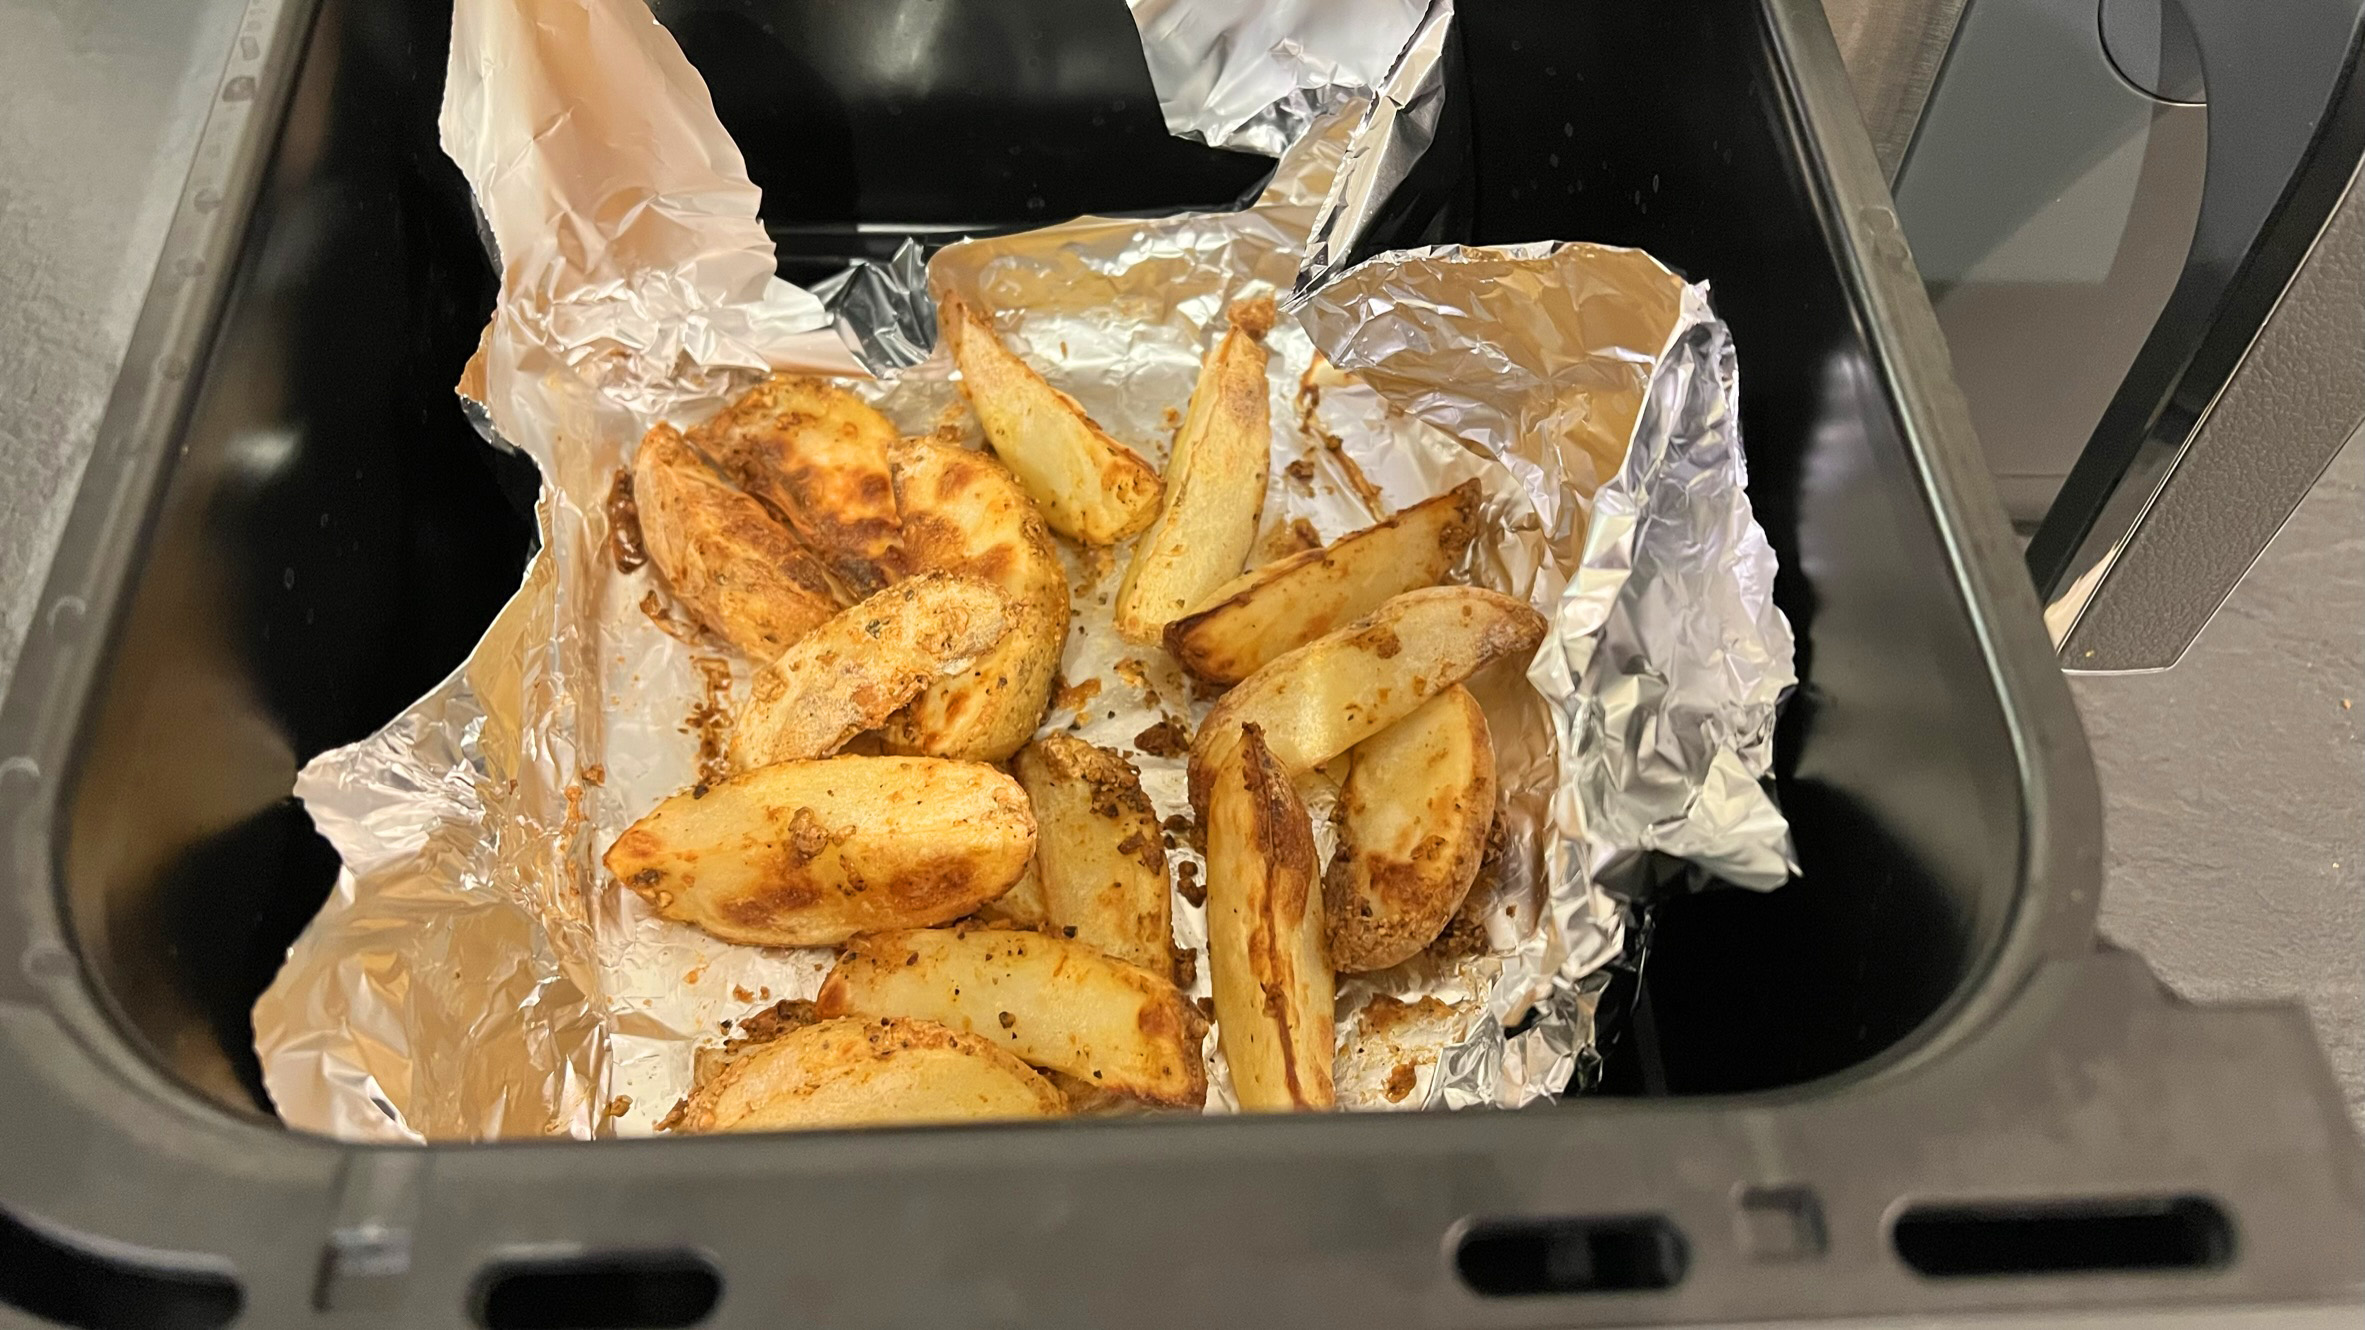 Boiled potato wedges in an air fryer basket